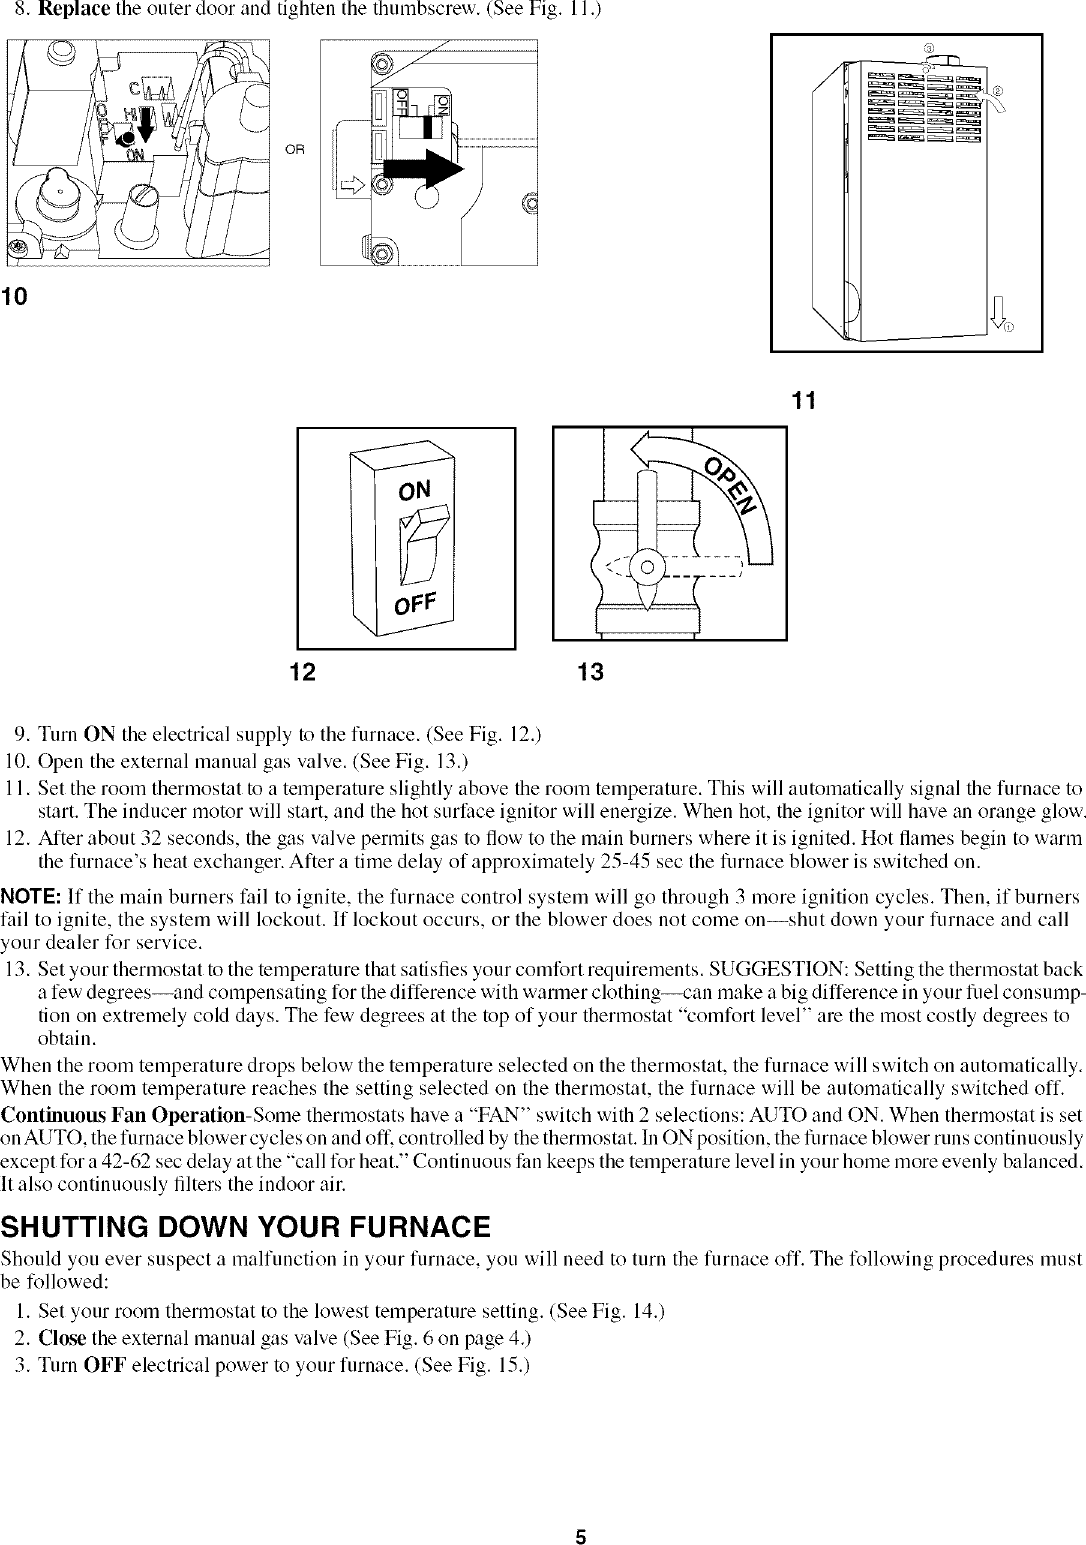 Page 5 of 12 - PAYNE  Furnace/Heater, Gas Manual L0408334